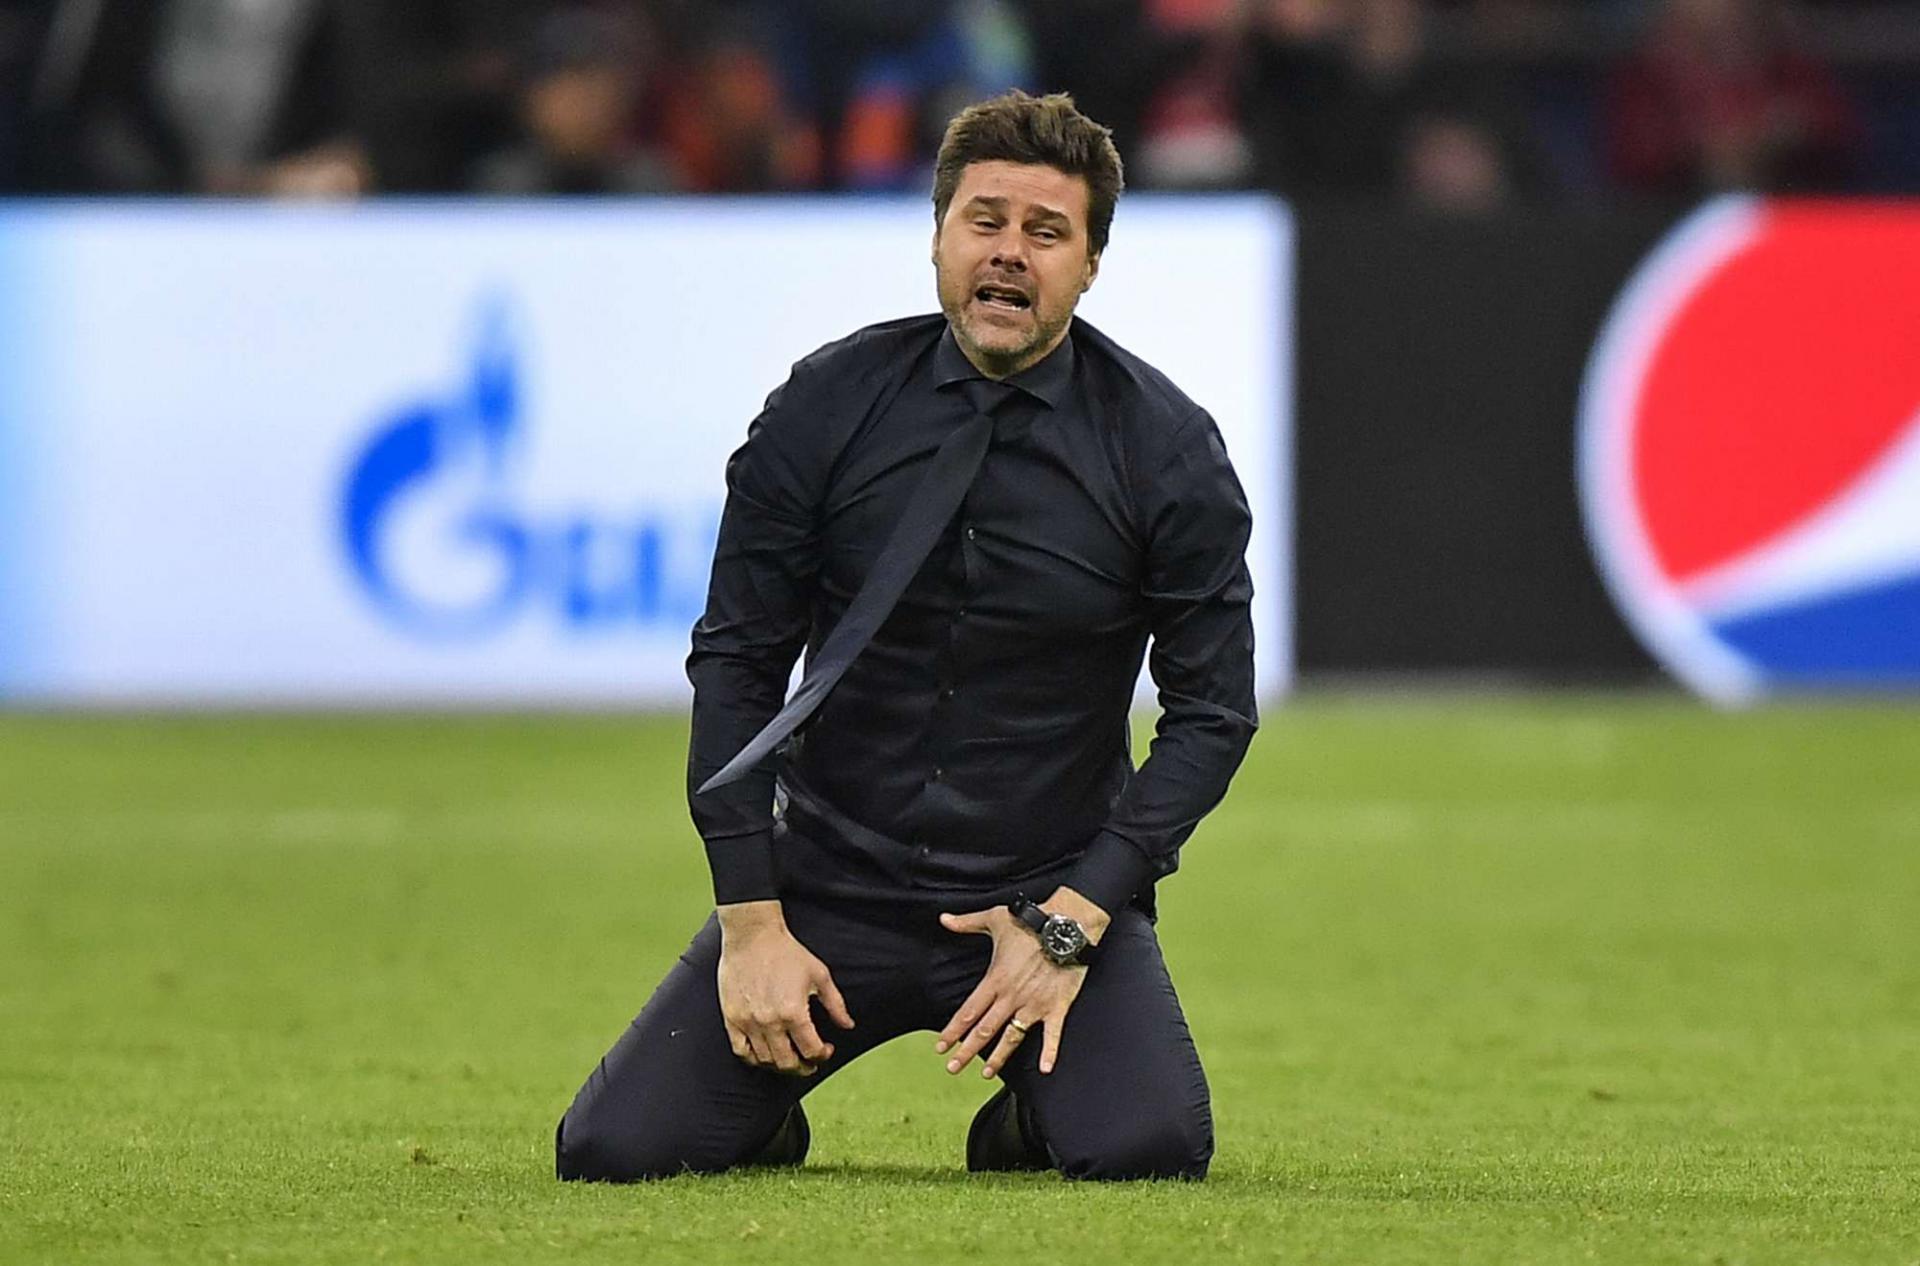 Pochettino’s position in Chelsea’s medical staff after player injuries